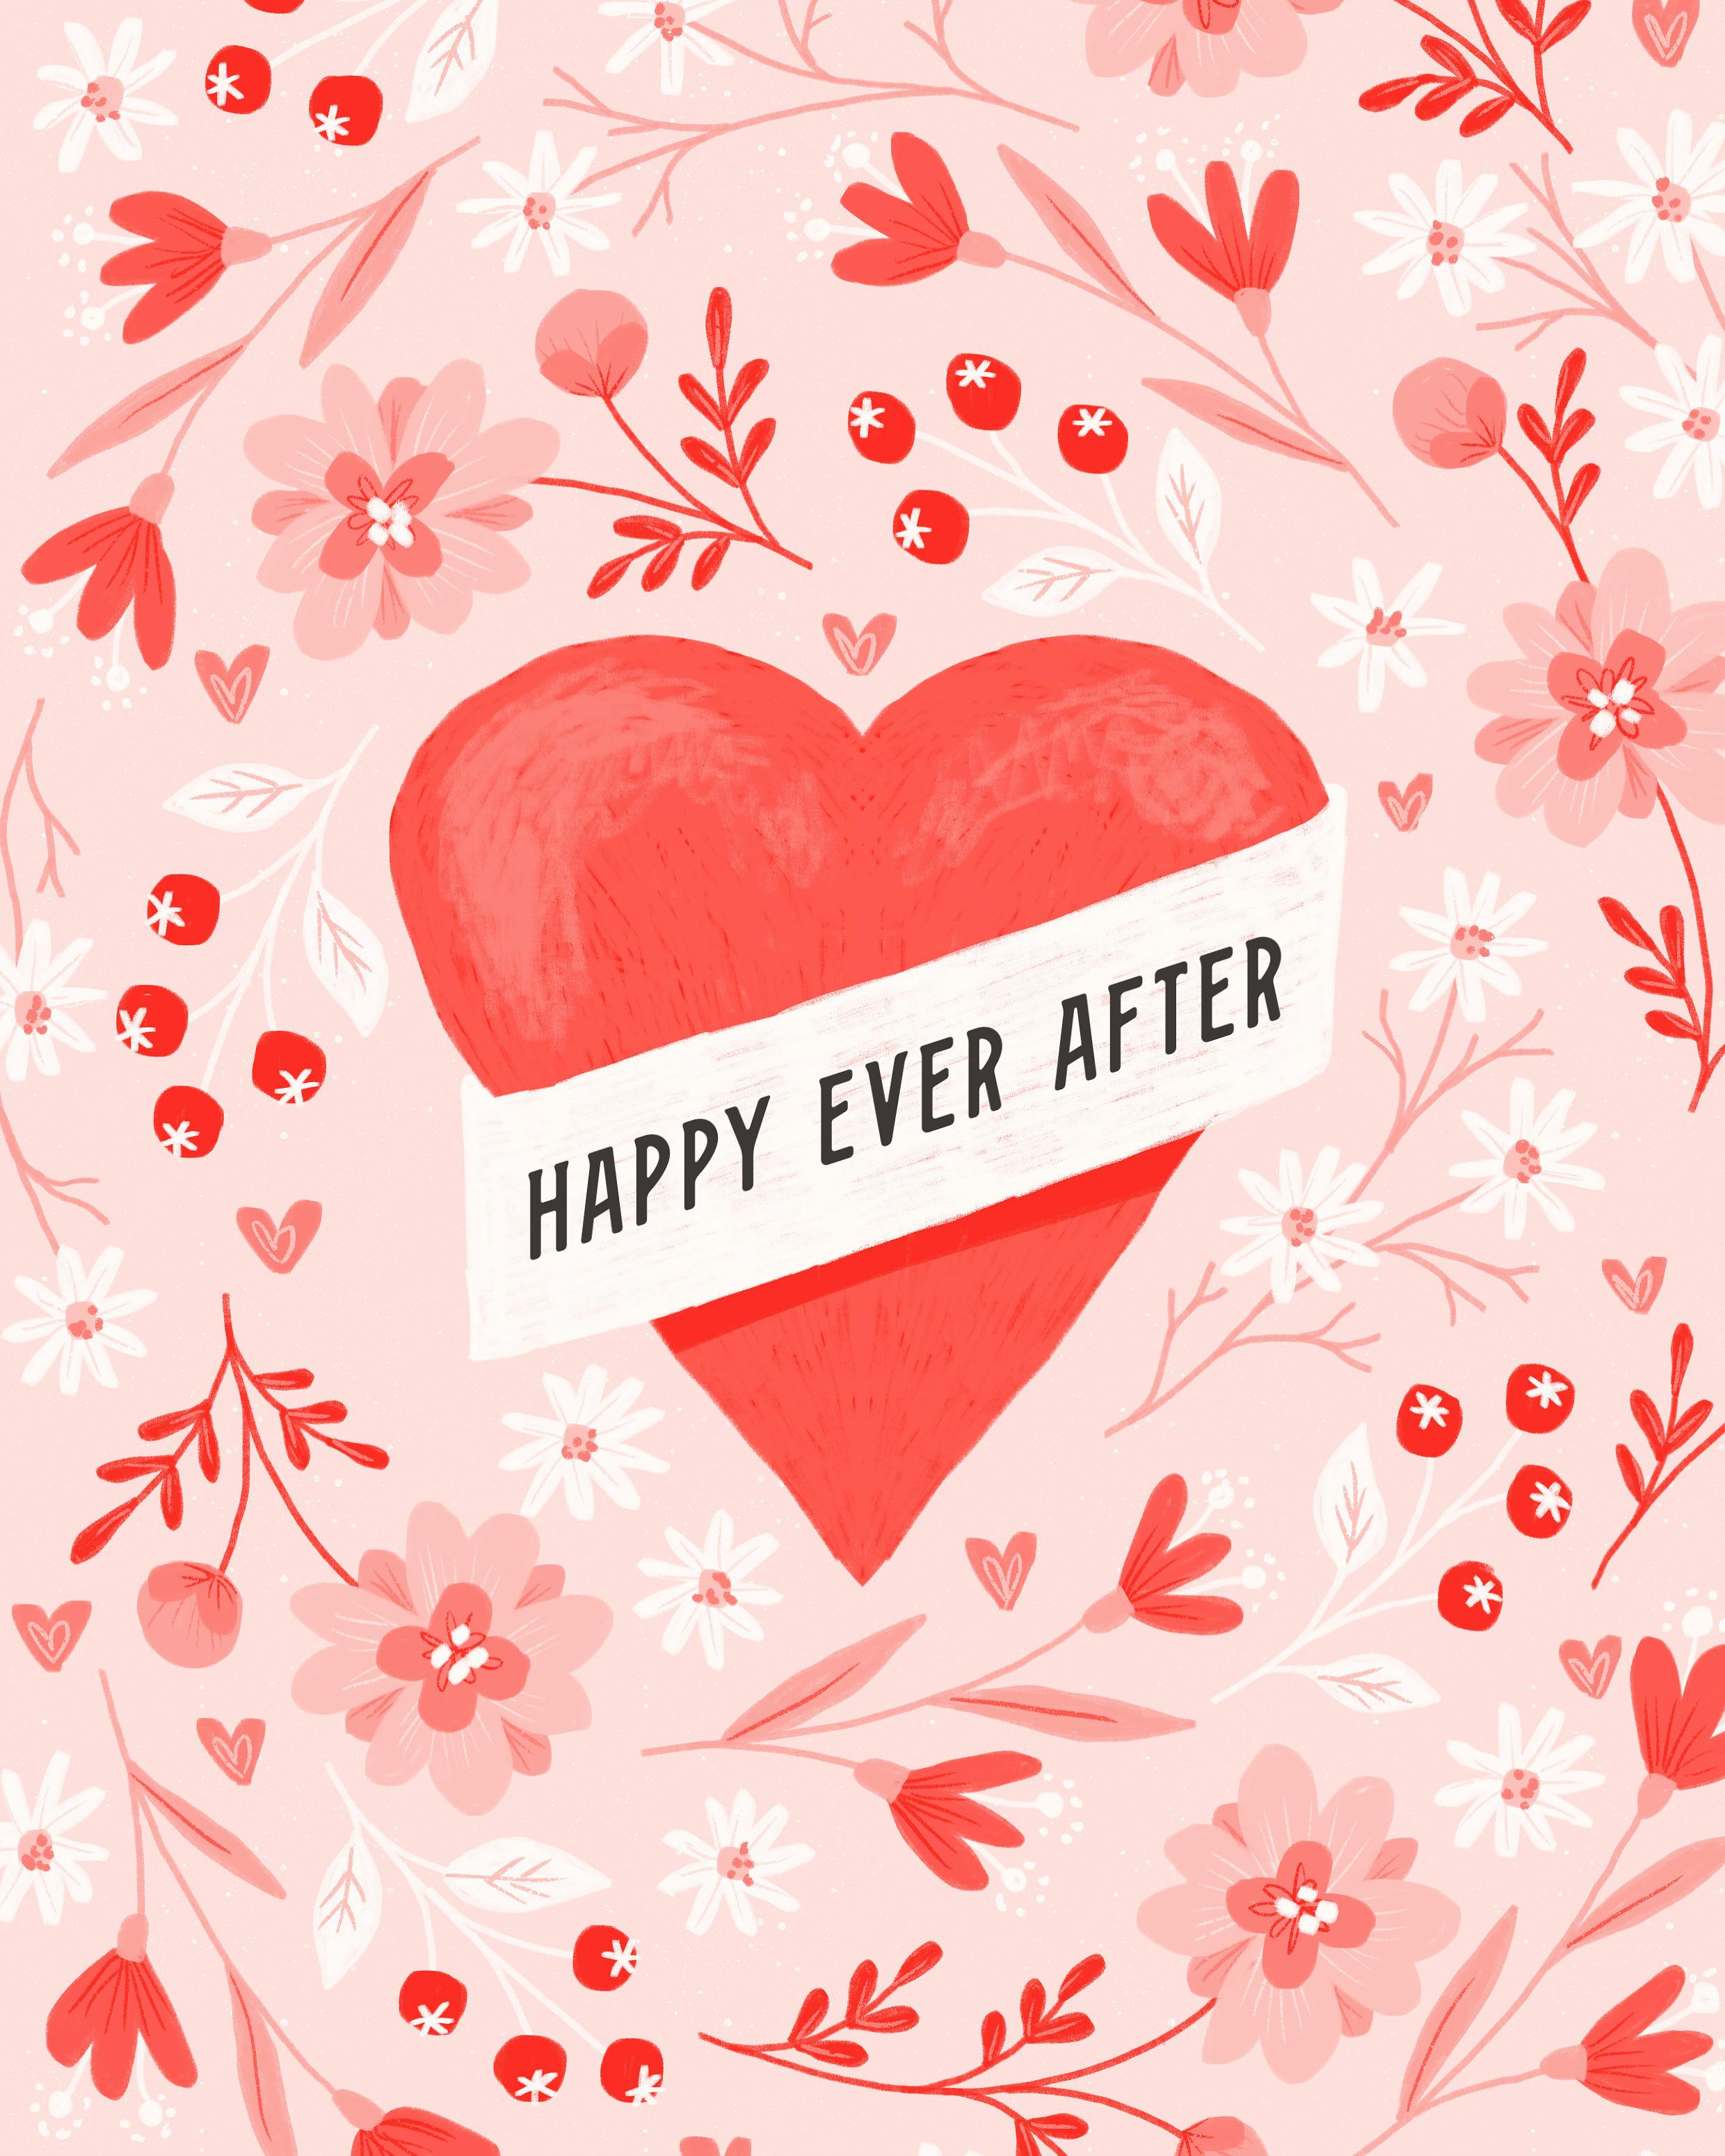 Red heart with a white banner saying „happy ever after“ on top of it surrounded by flowers, berries and hearts all in different shades of red and pink.